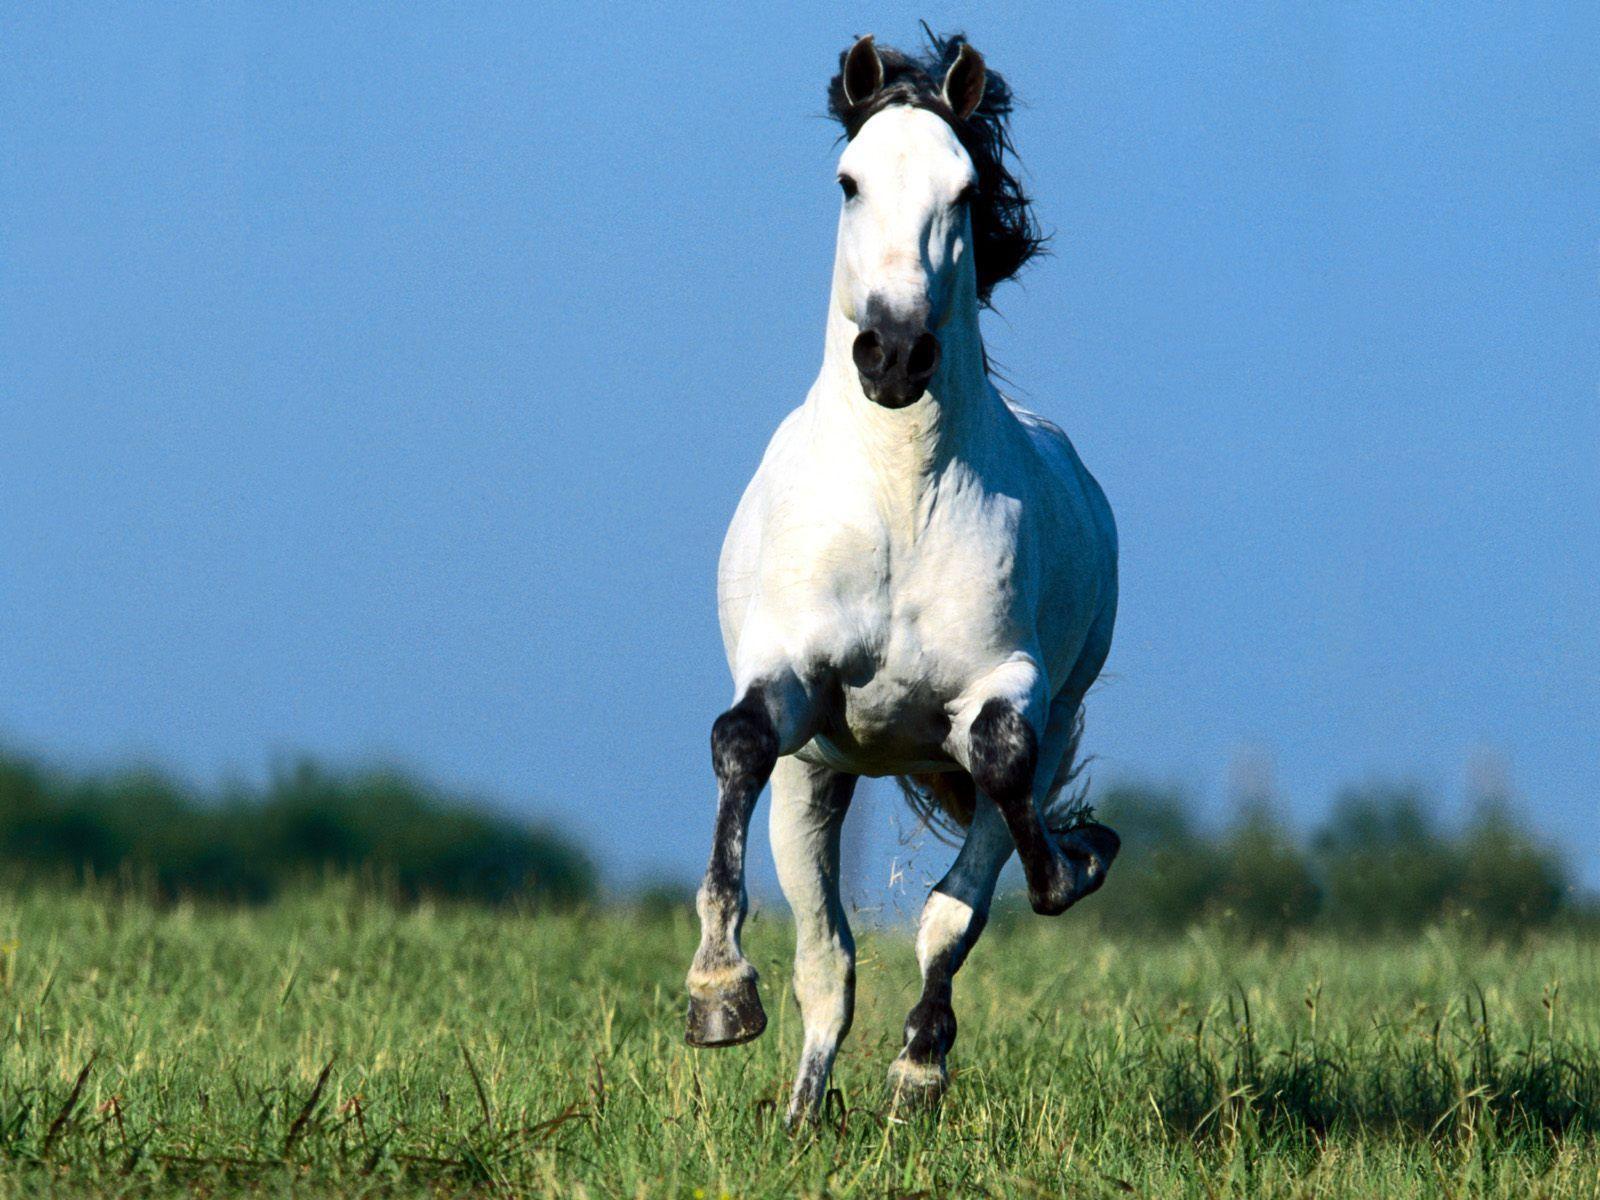 image For: Beautiful Cute White Coloured Horse Picture / Photo